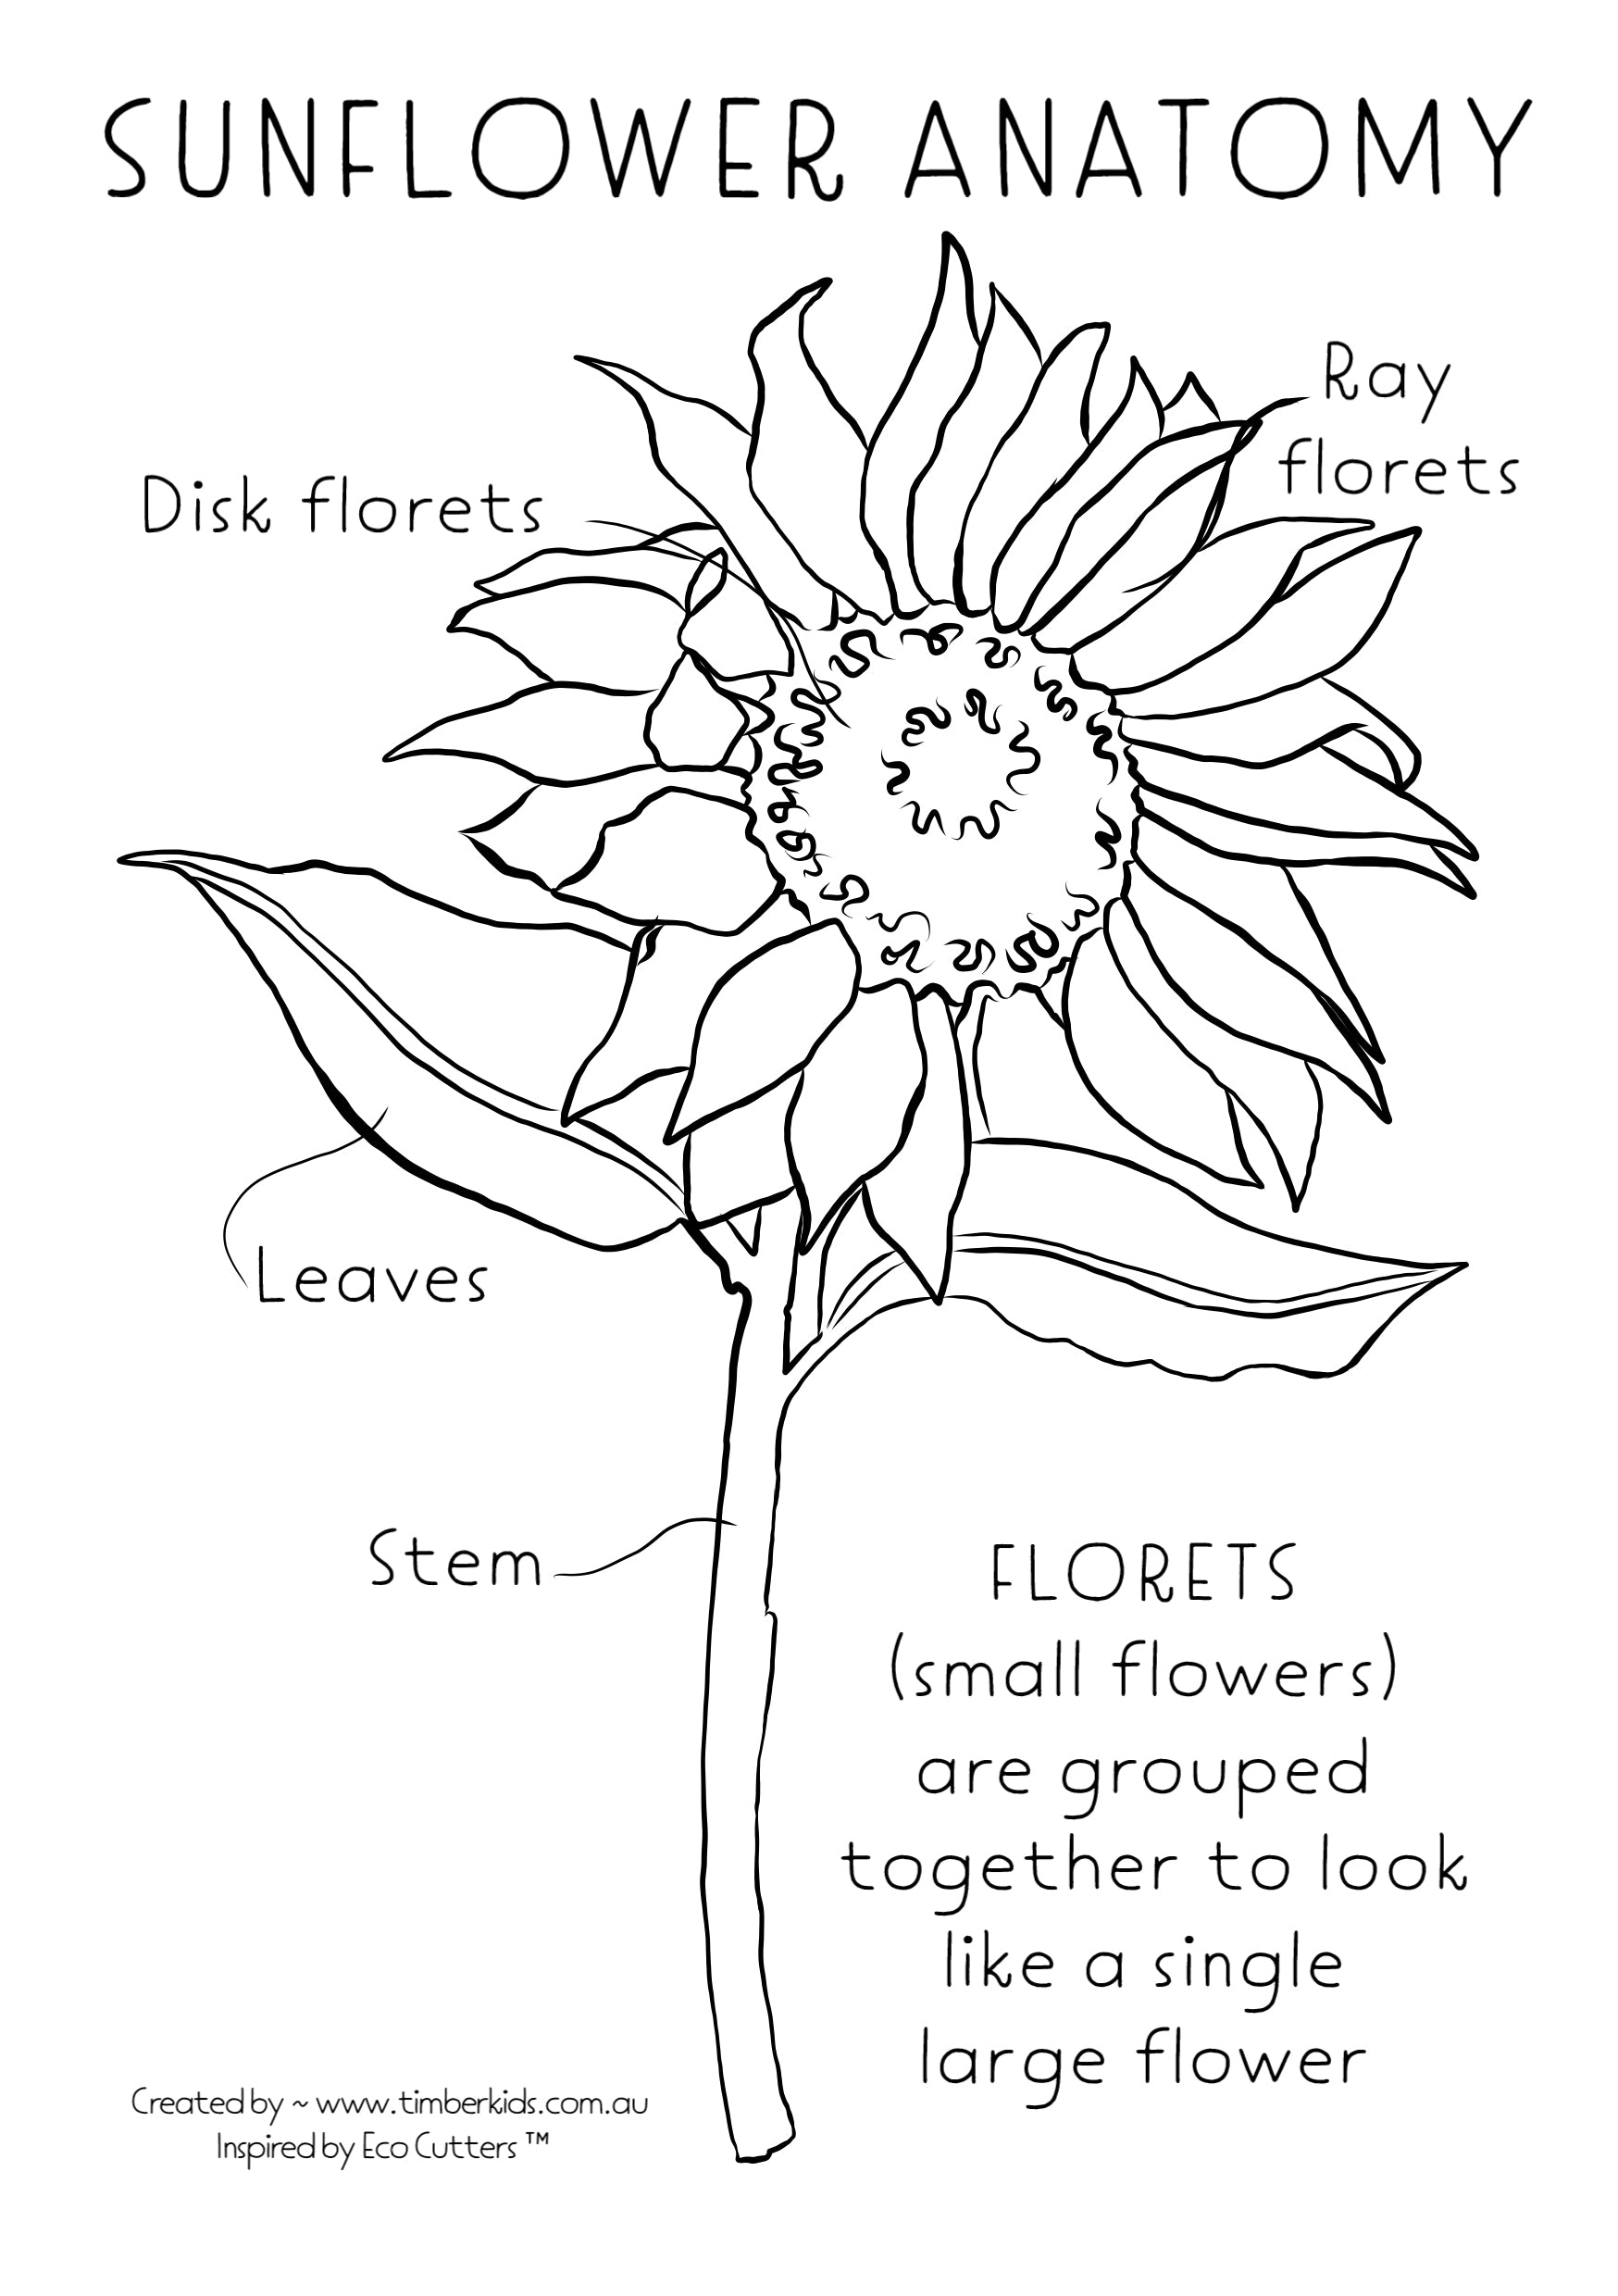 Sunflower Anatomy Colour In - Timber Kids 